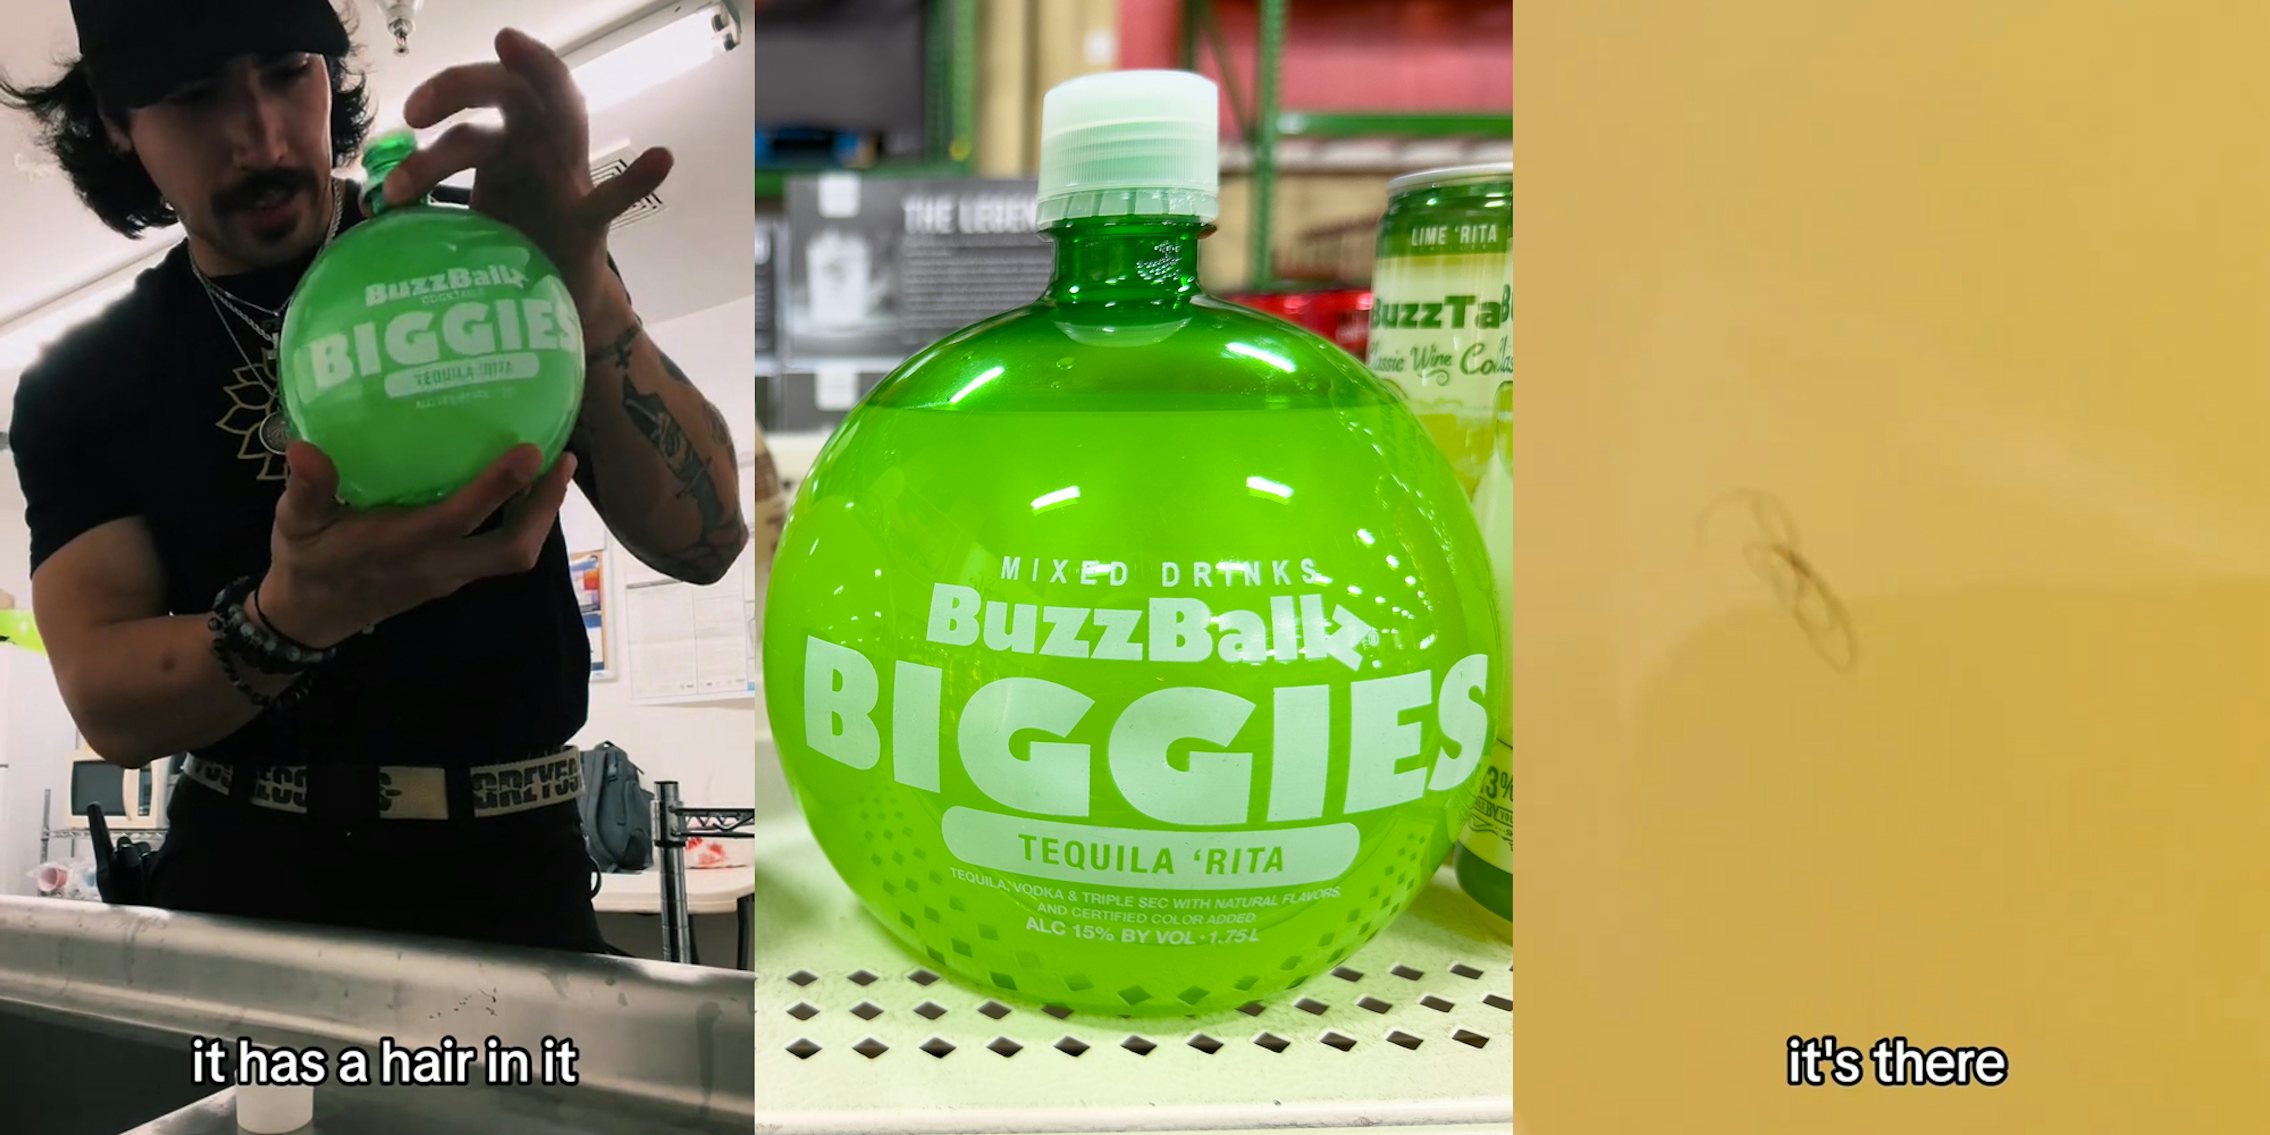 man holding BuzzBall Biggie with caption 'it has a hair in it' (l) BuzzBall Biggie drink on shelf (c) hair in drink with caption 'it's there' (r)